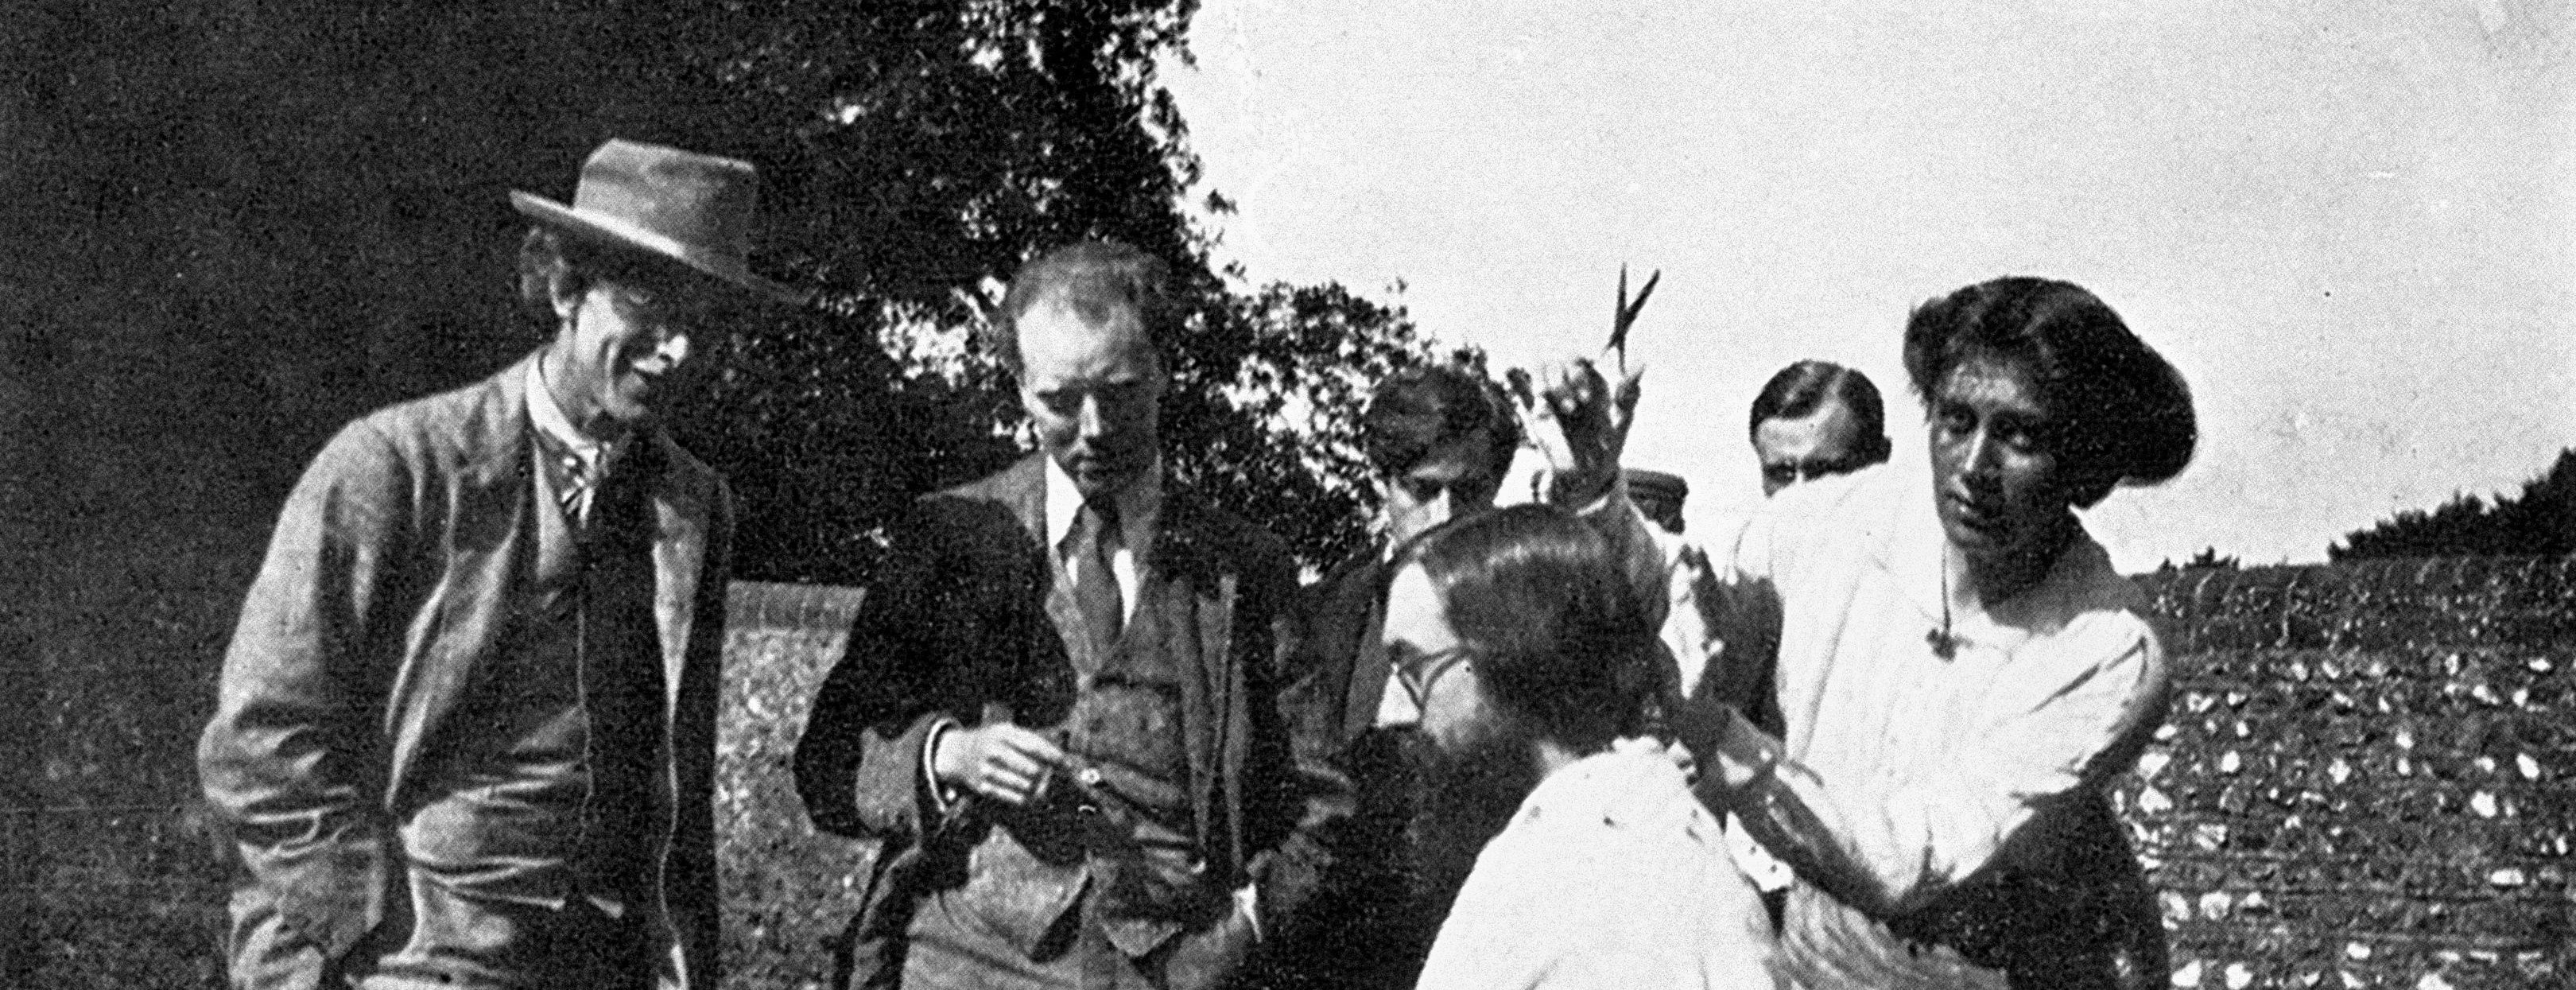 Vanessa Bell is cutting Lytton Strachey's hair while Roger Fry, Clive Bell, Duncan Grant and an unidentified guest look on